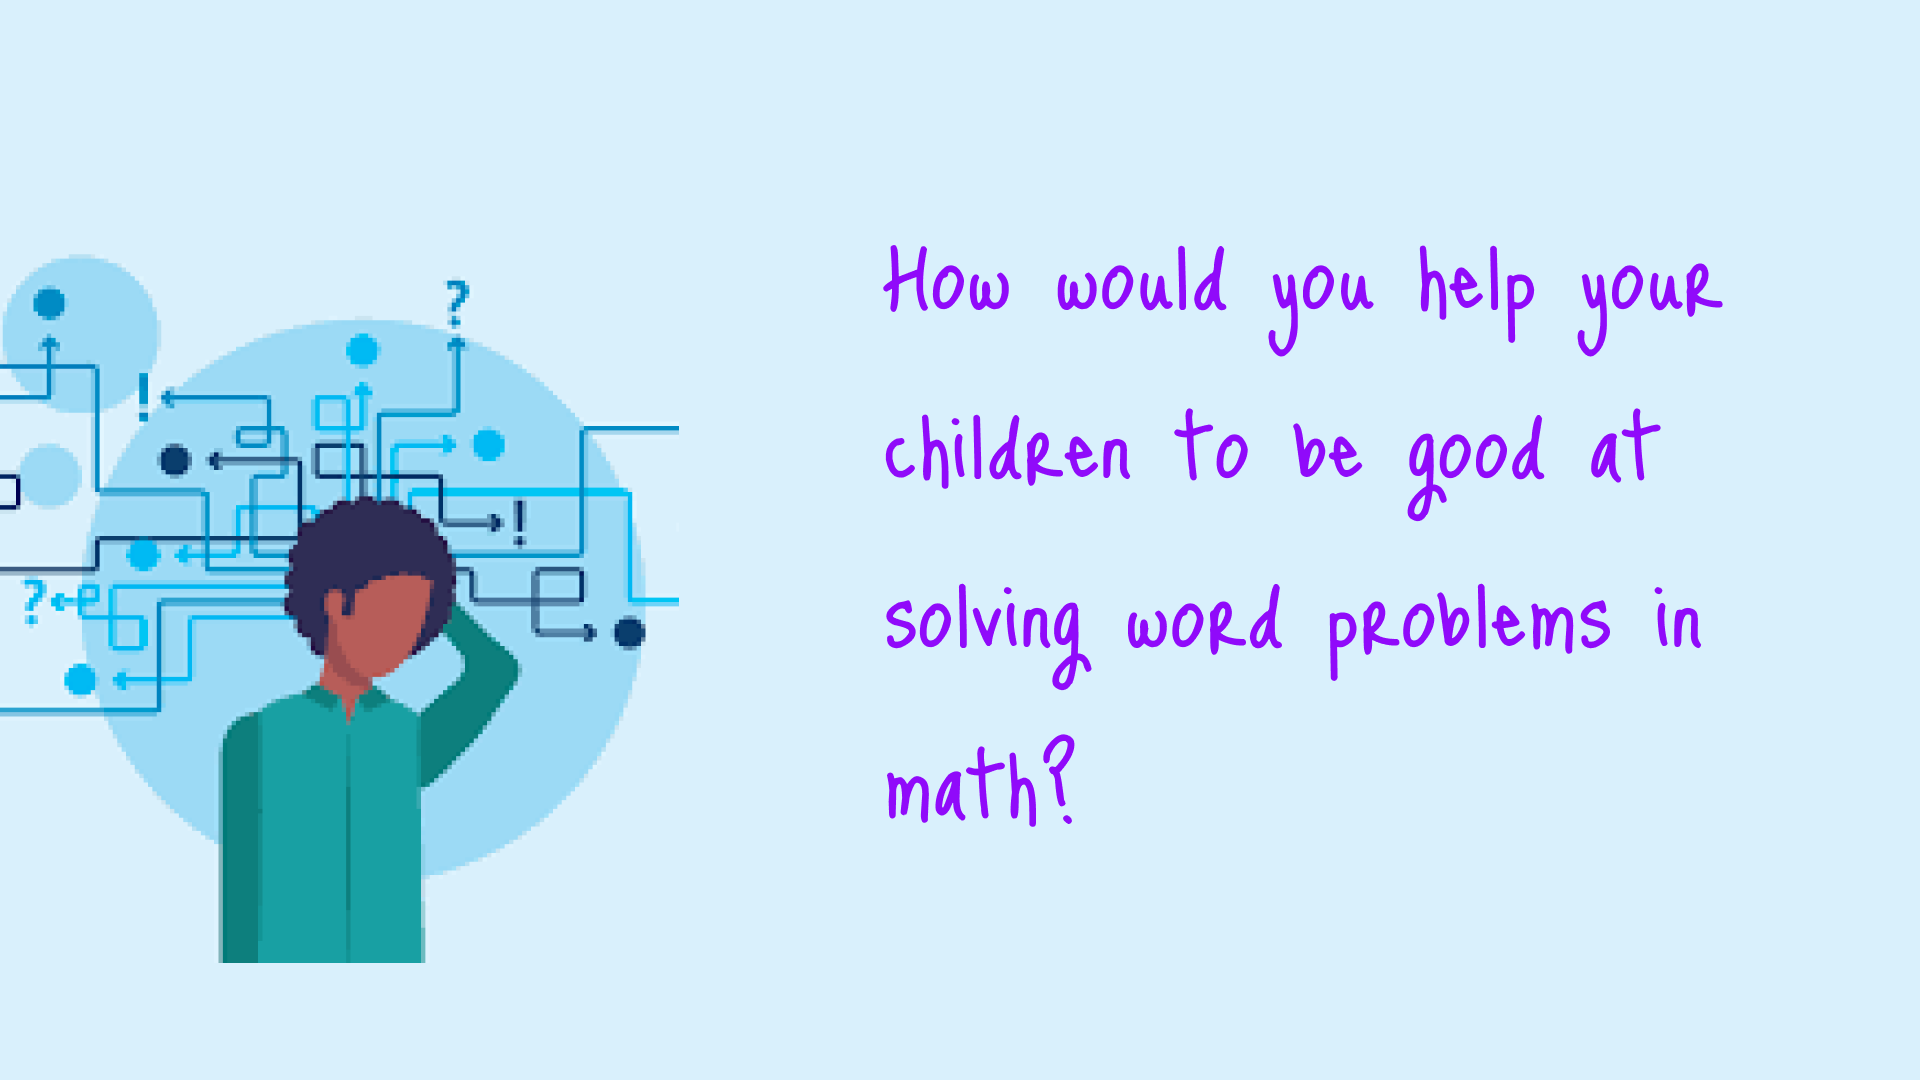 how would you help your children to be good at problem solving